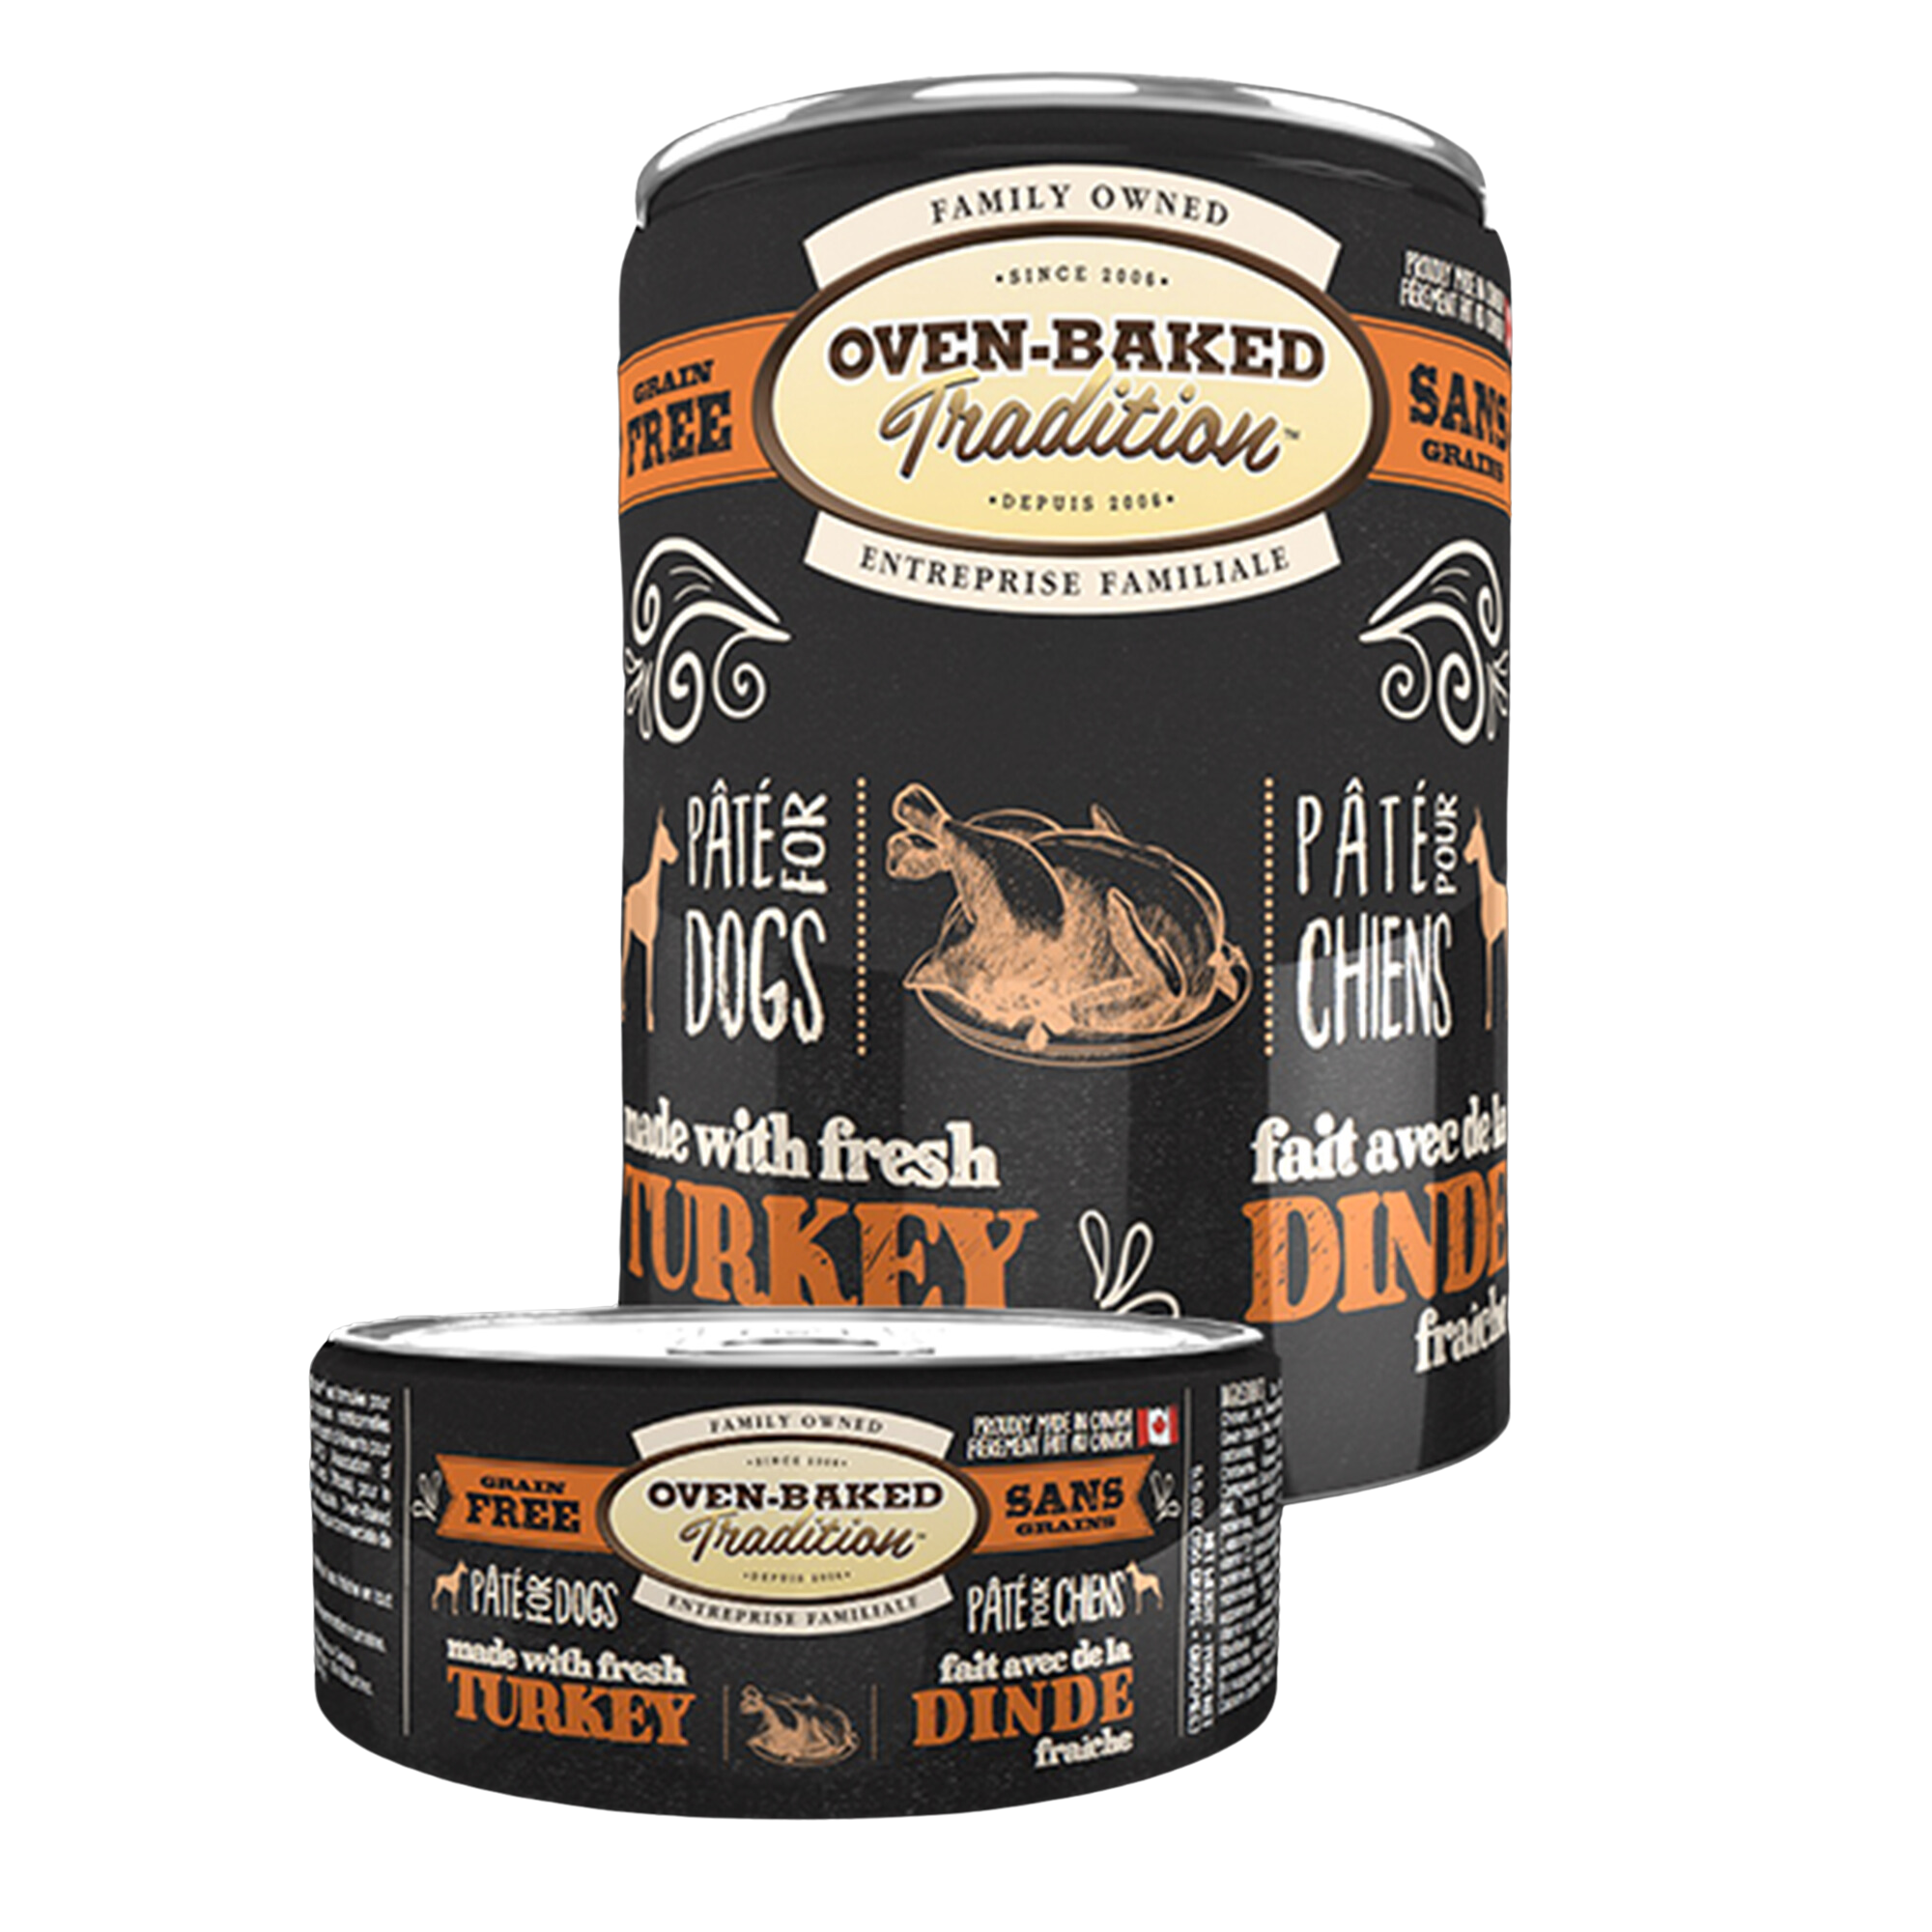 Oven-Baked Tradition Dog Food, Grain-Free, Turkey Pate